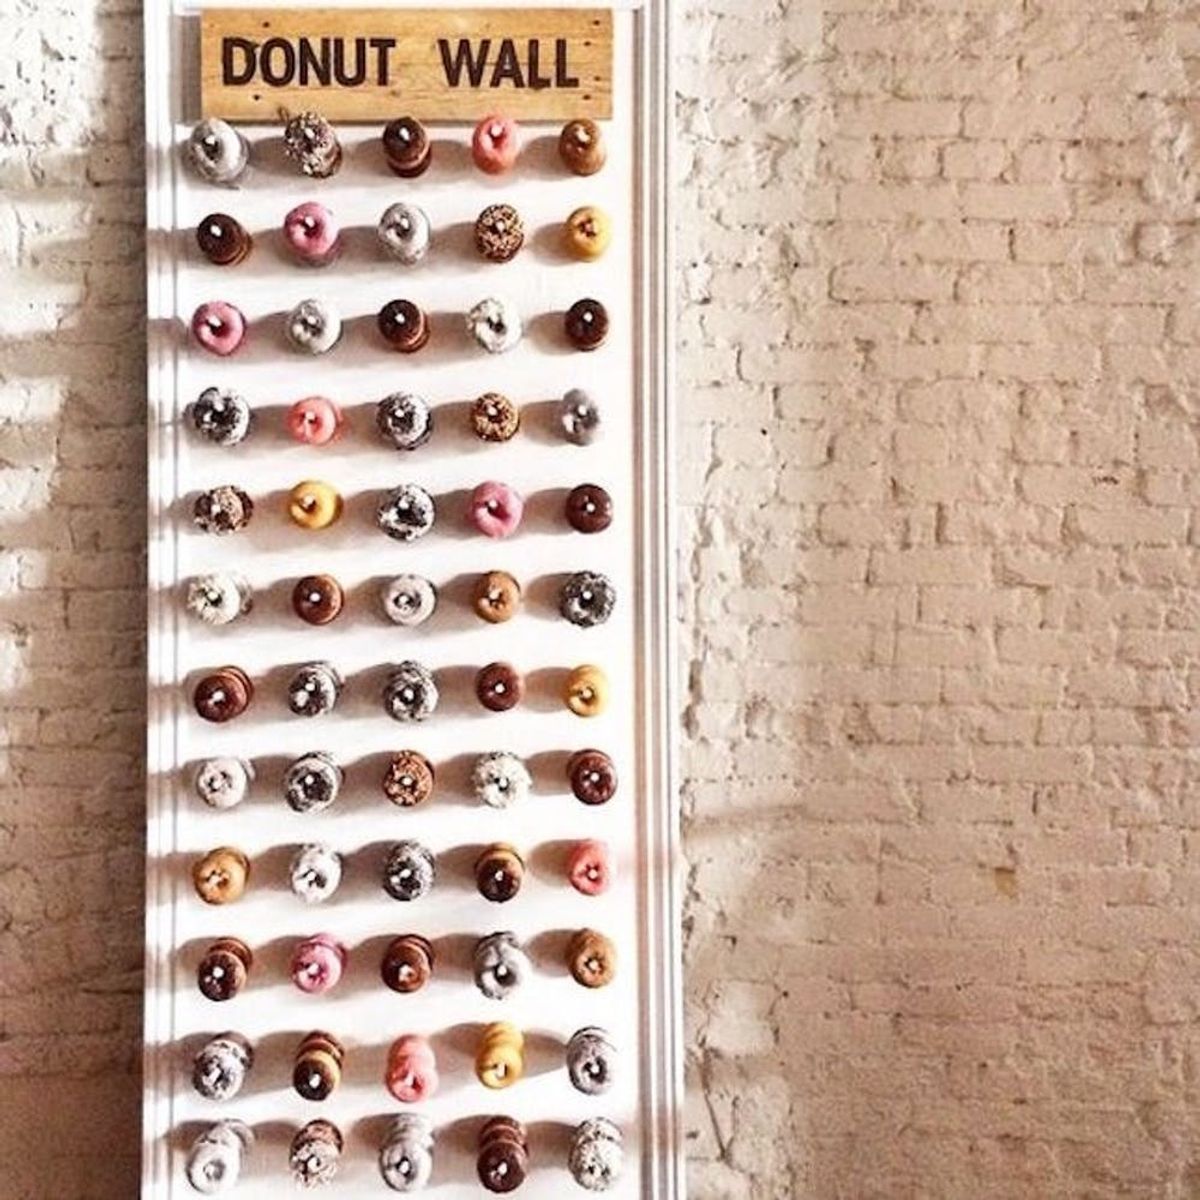 Donut Walls Are the Latest Dessert Trend You Need to See (and Eat)